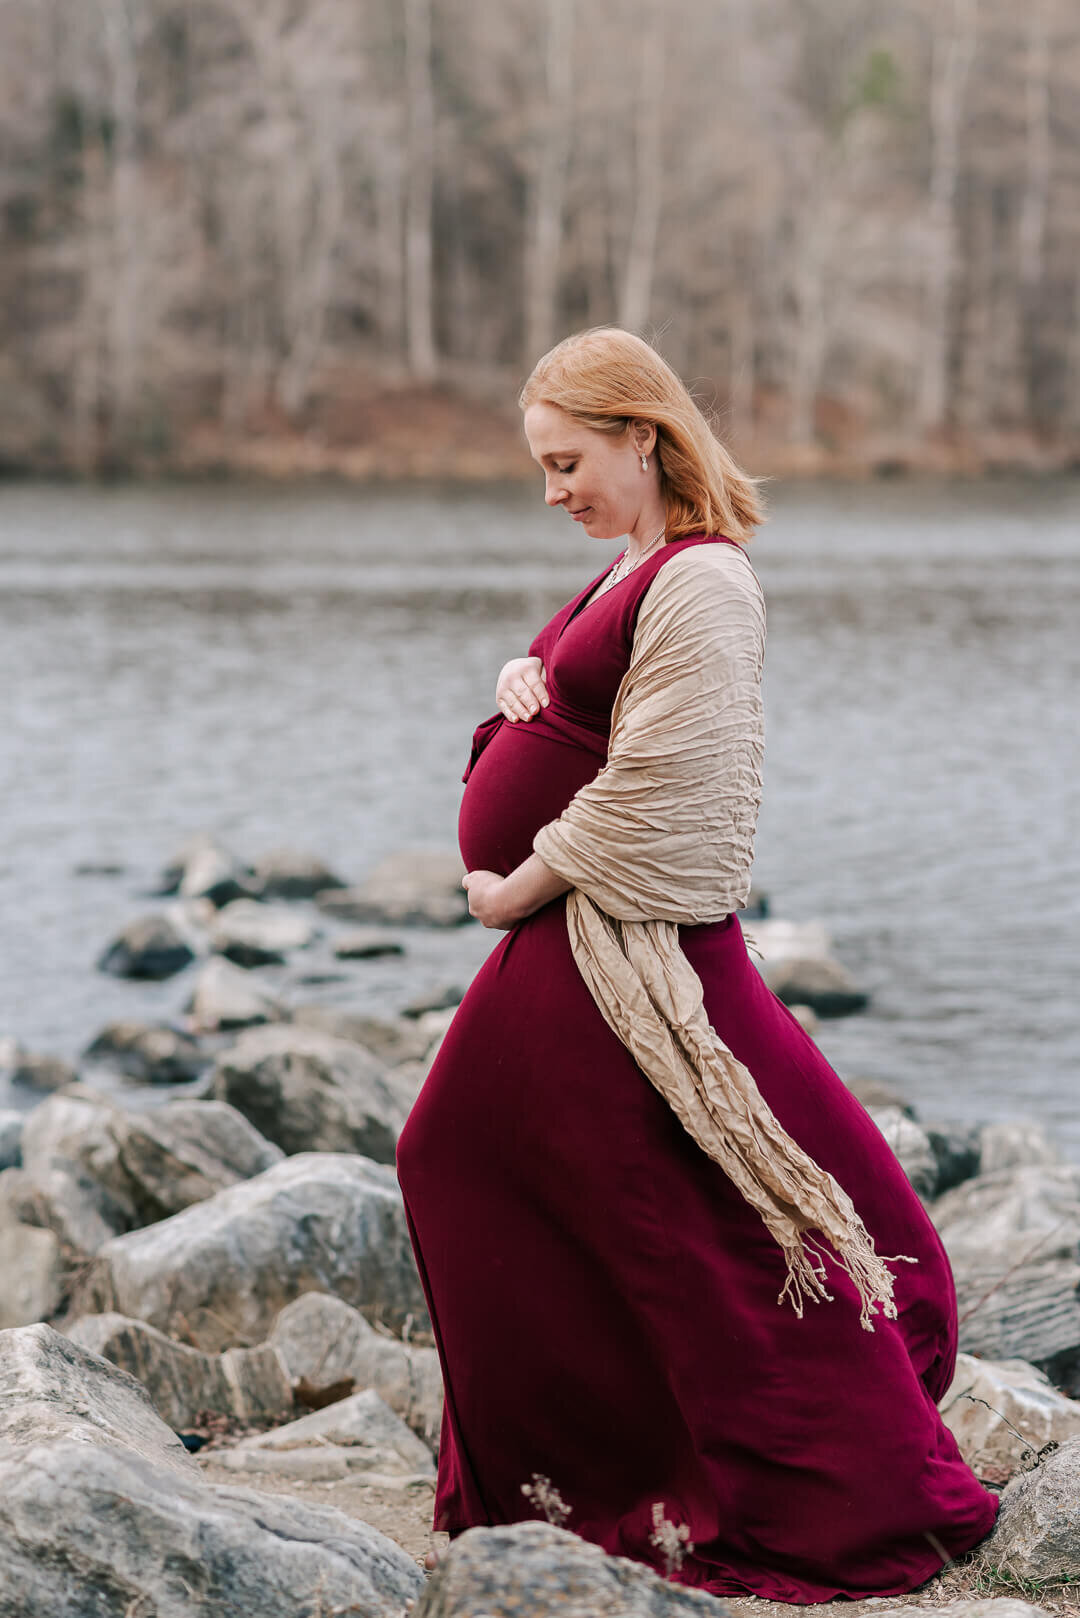 A woman holding her pregnant belly while her burgundy dress billows in the wind